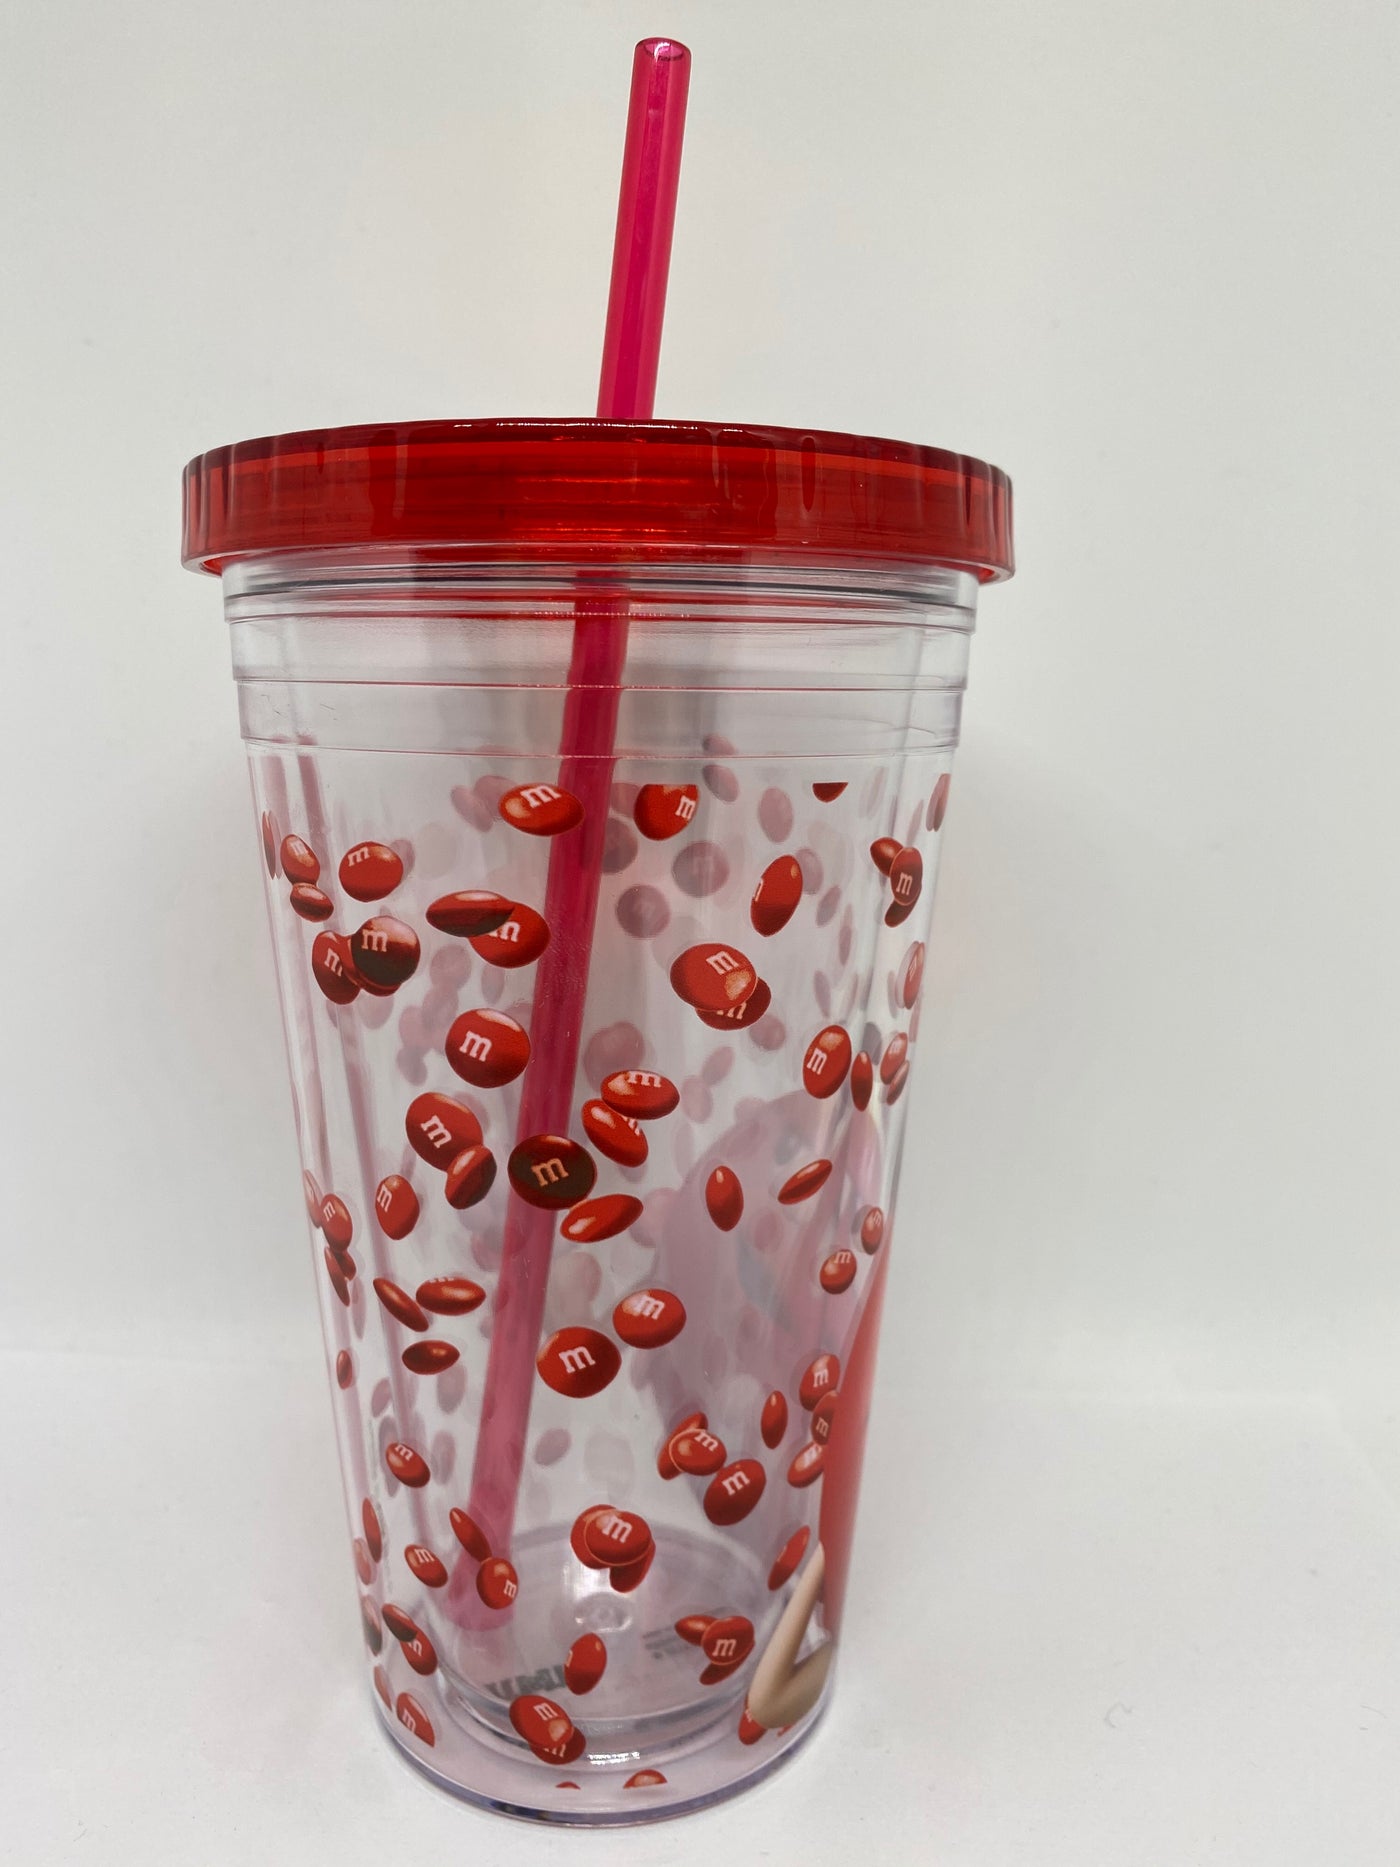 M&M's World Red Big Face Lentils Tumbler with Straw New